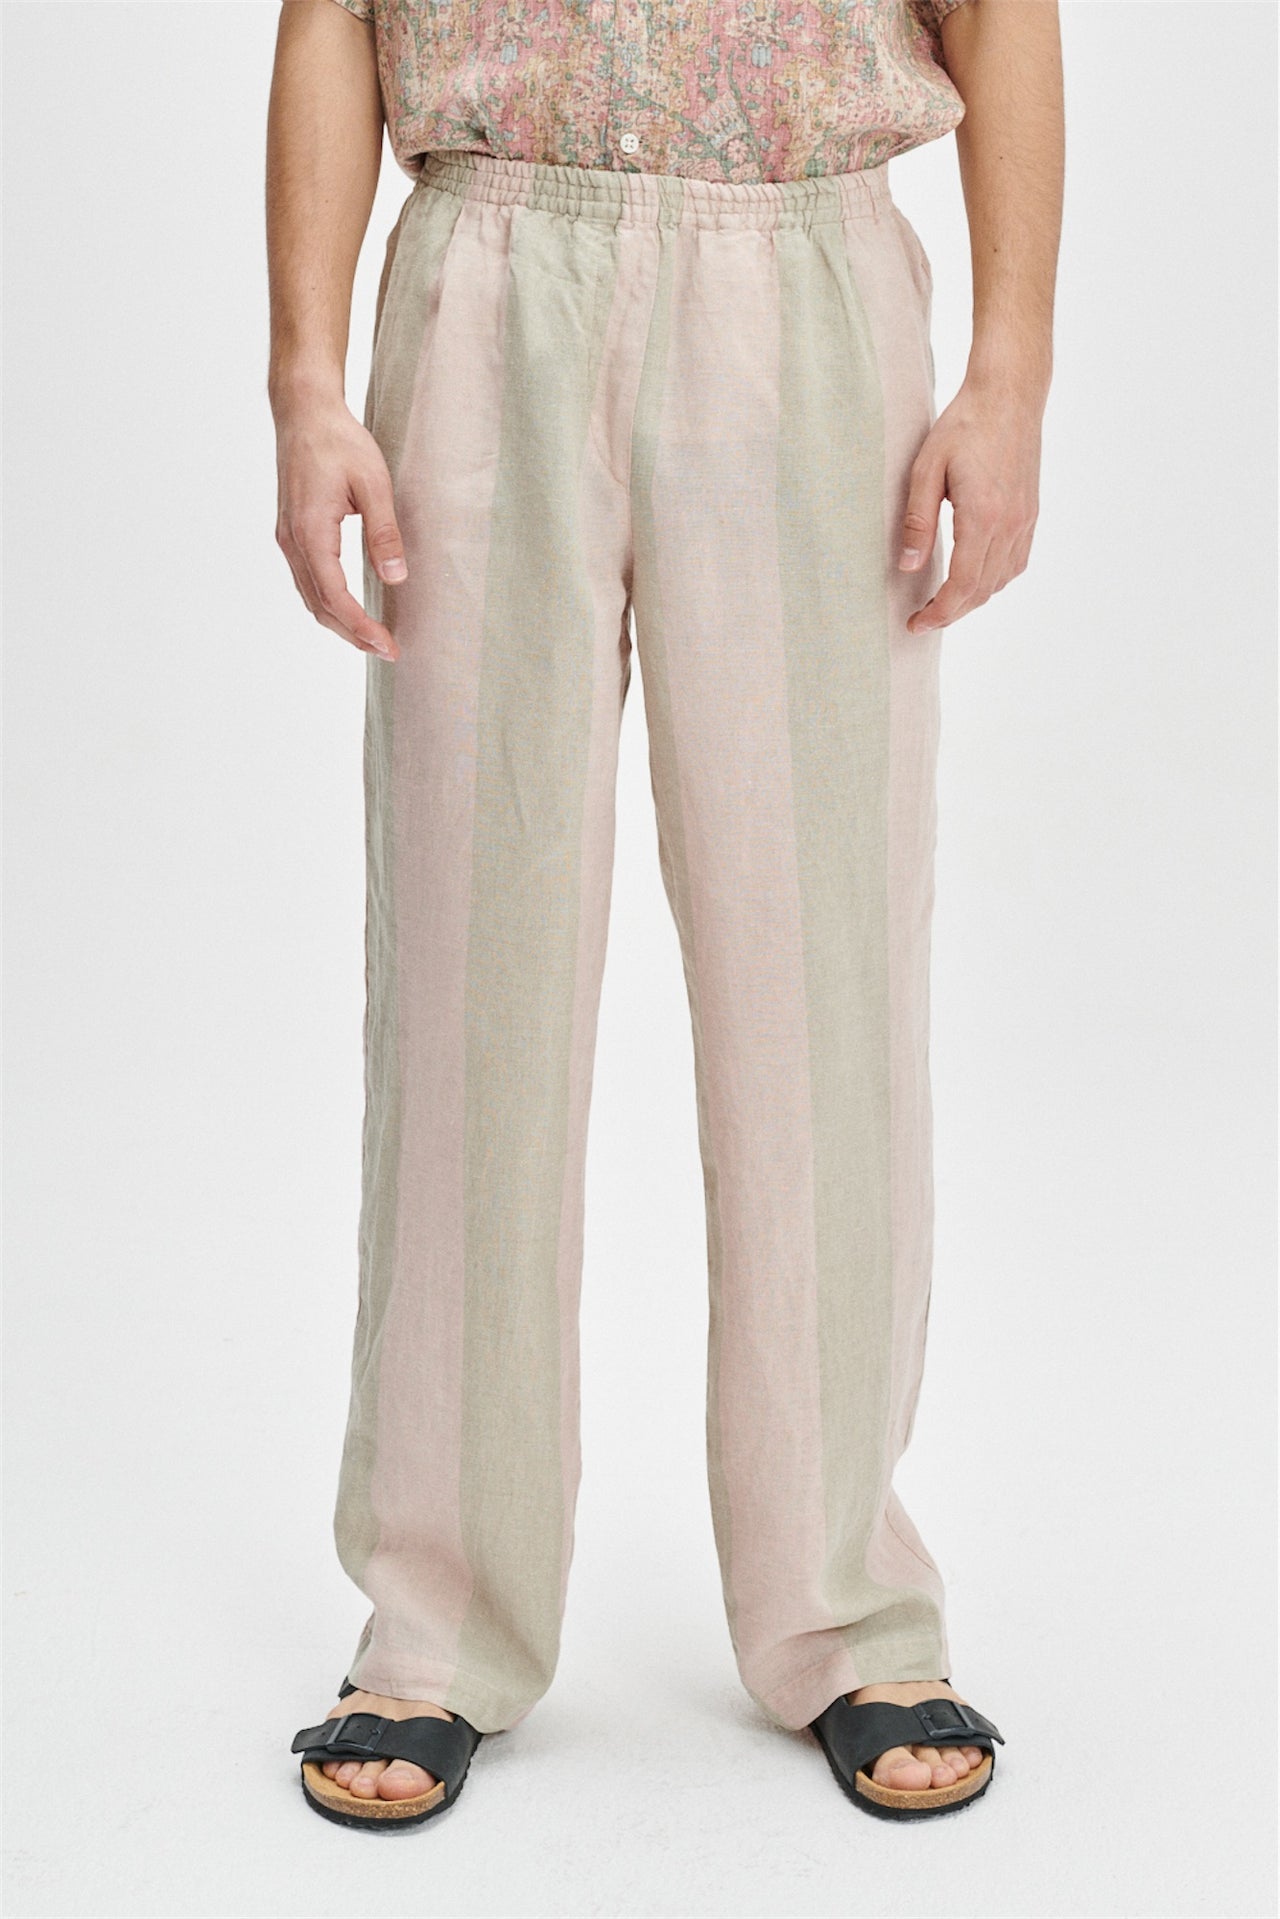 Unisex Pants in Tonal Pink and Beige Stripes of a Superb Italian Traceable Linen